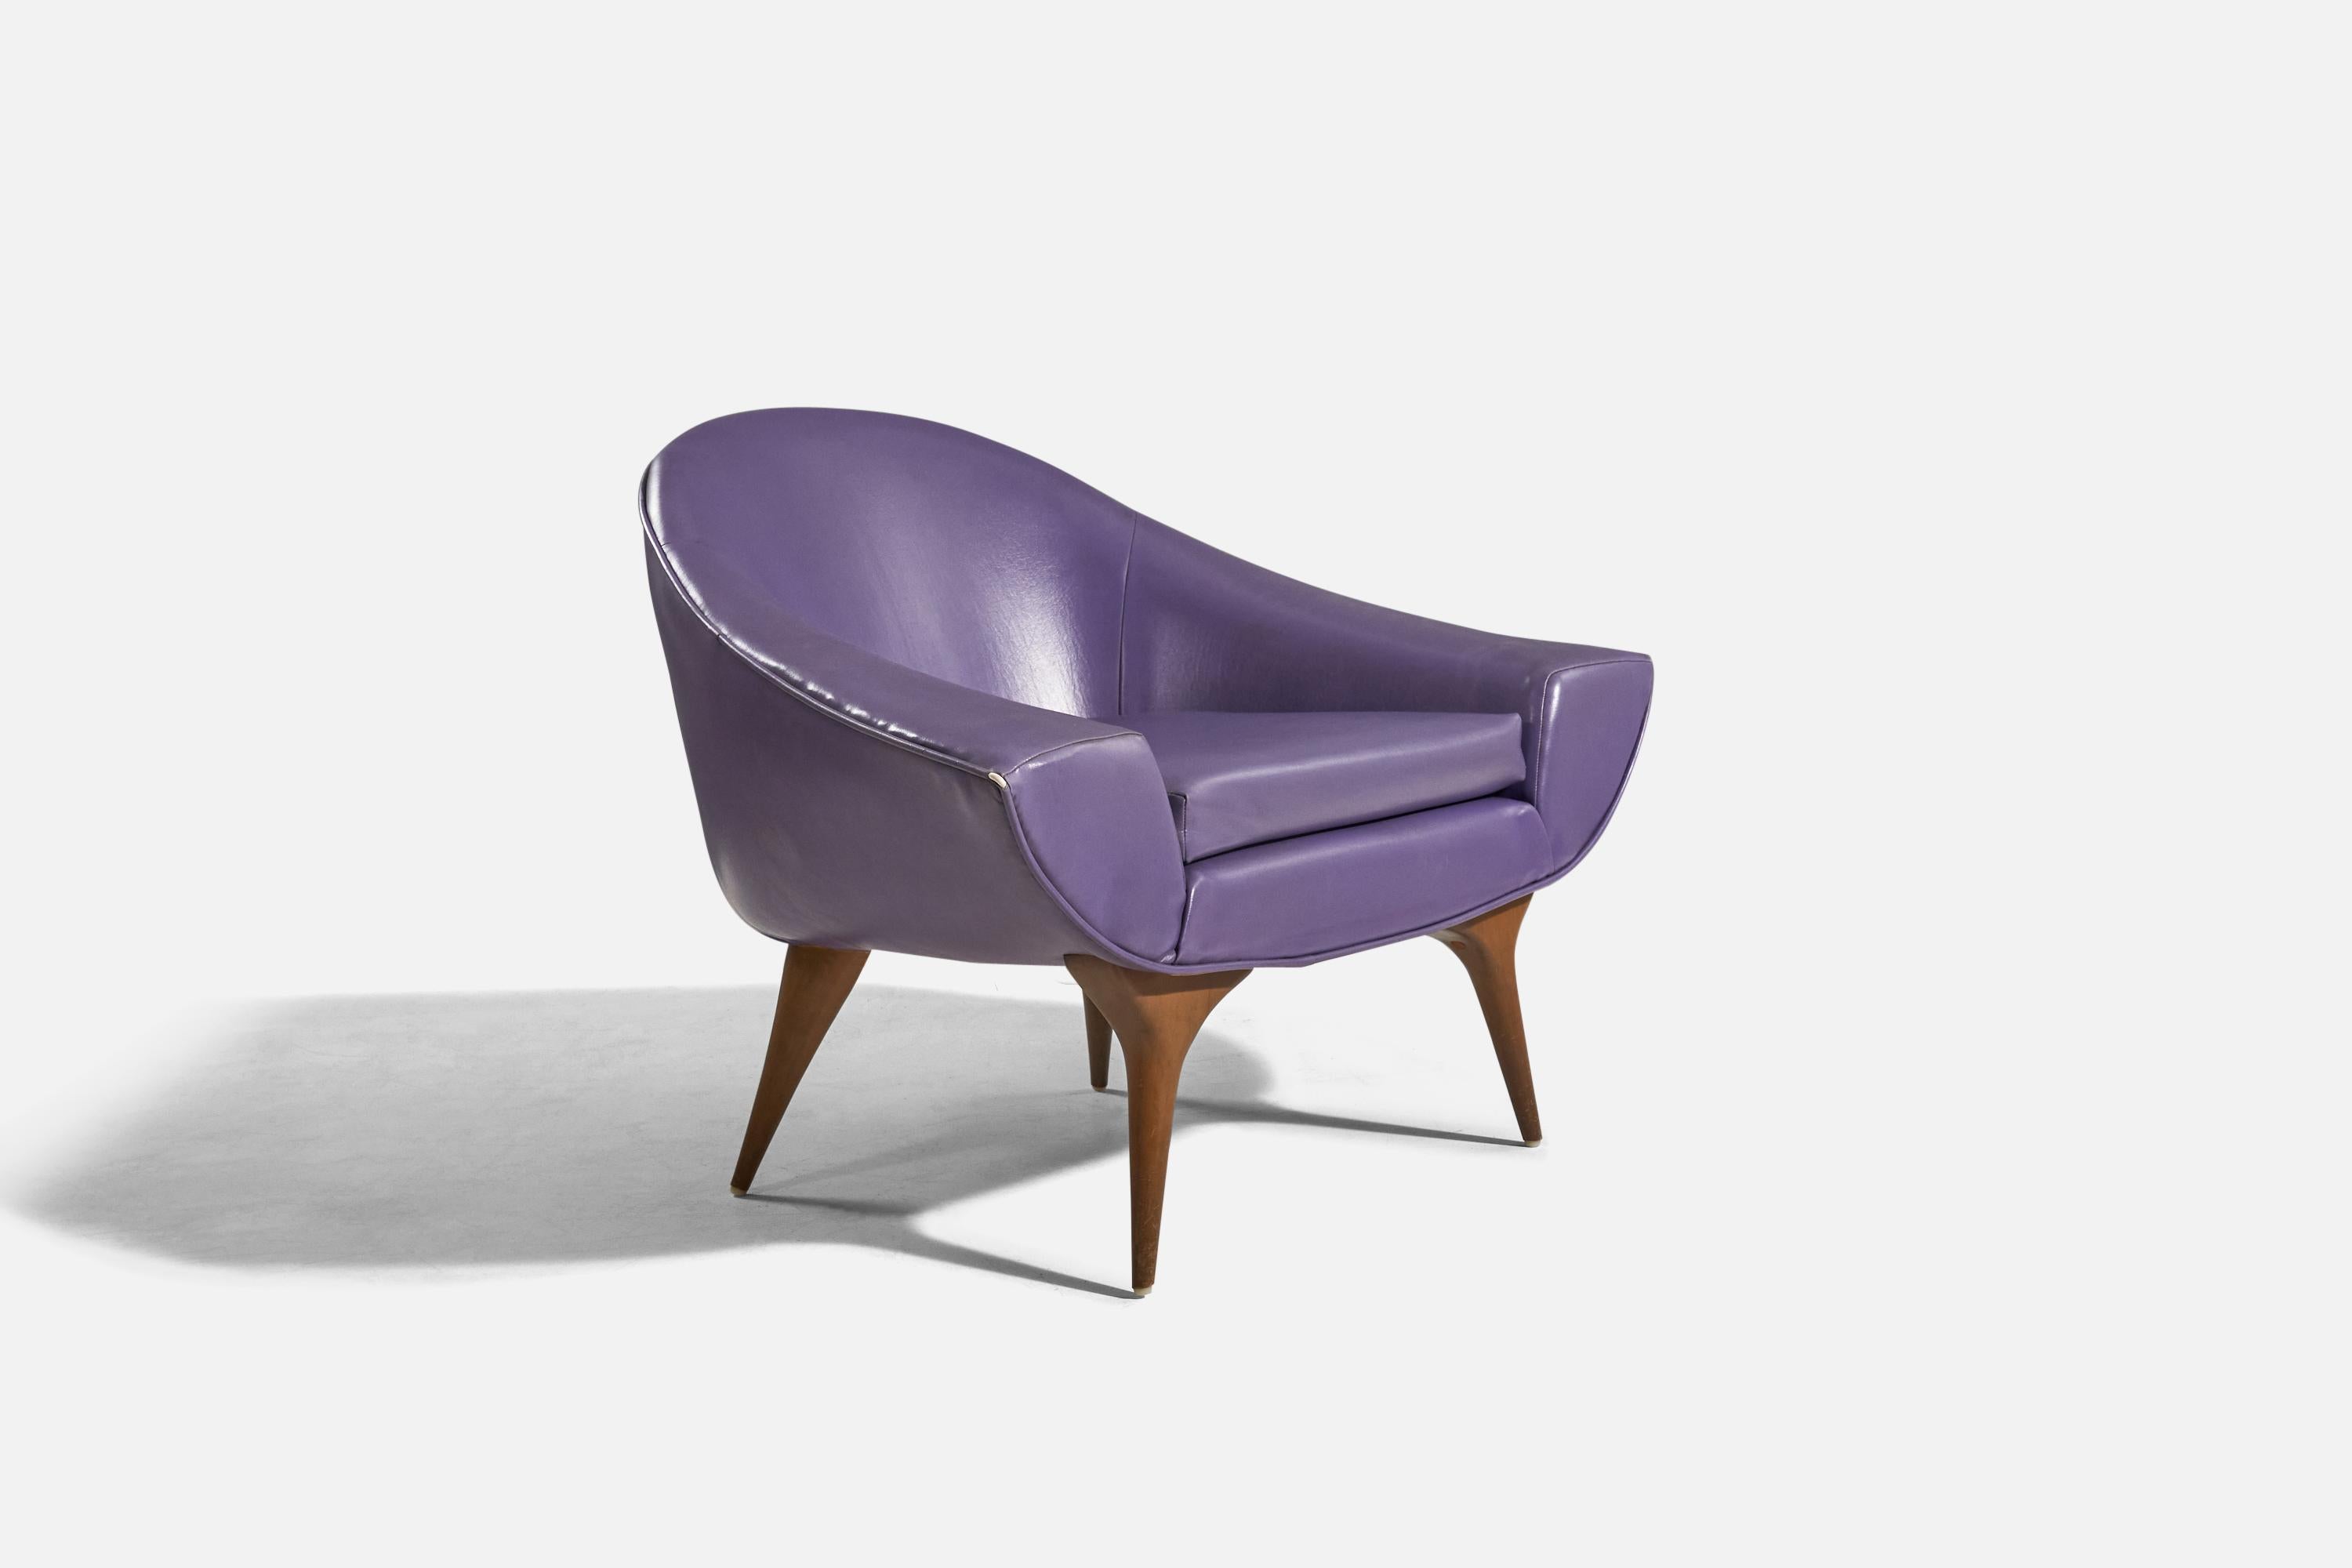 A purple vinyl and walnut lounge chair designed and produced by Karpen of California, USA, 1950s.